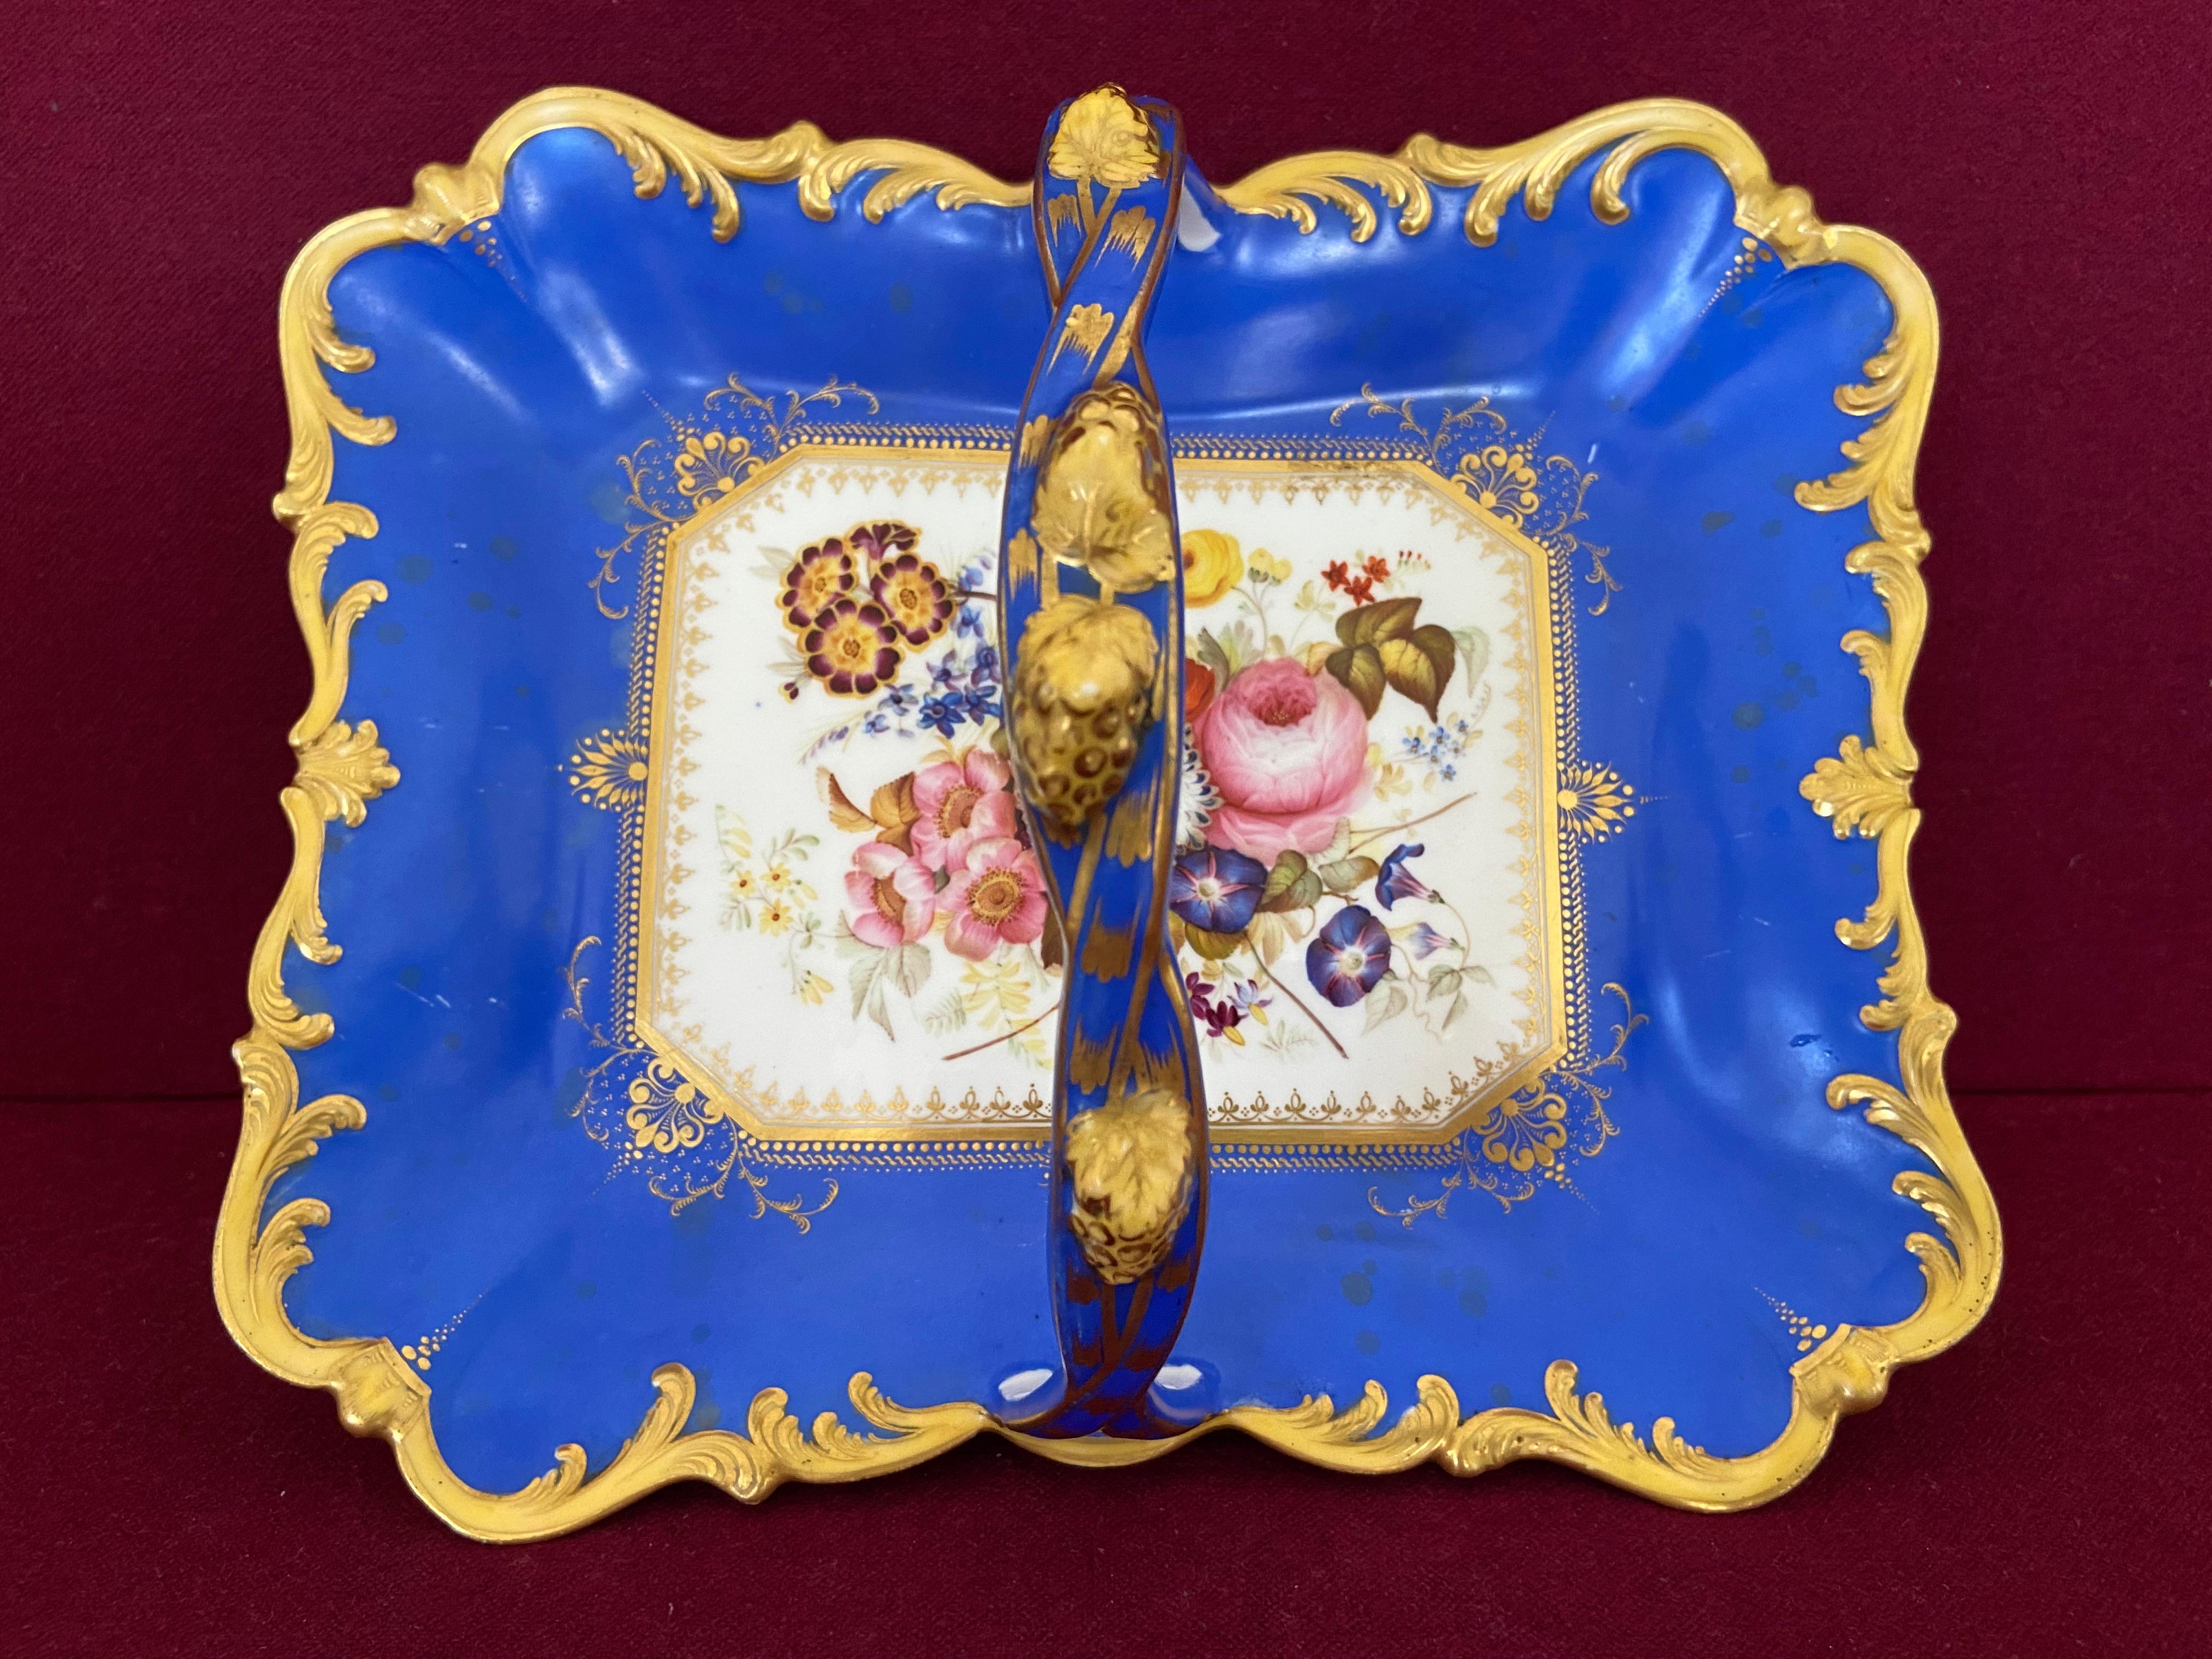 A fine Samuel Alcock porcelain fruit basket c.1830-1840. Finely decorated with painted Summer flowers. 

Condition: A few areas of staining to the blue ground.